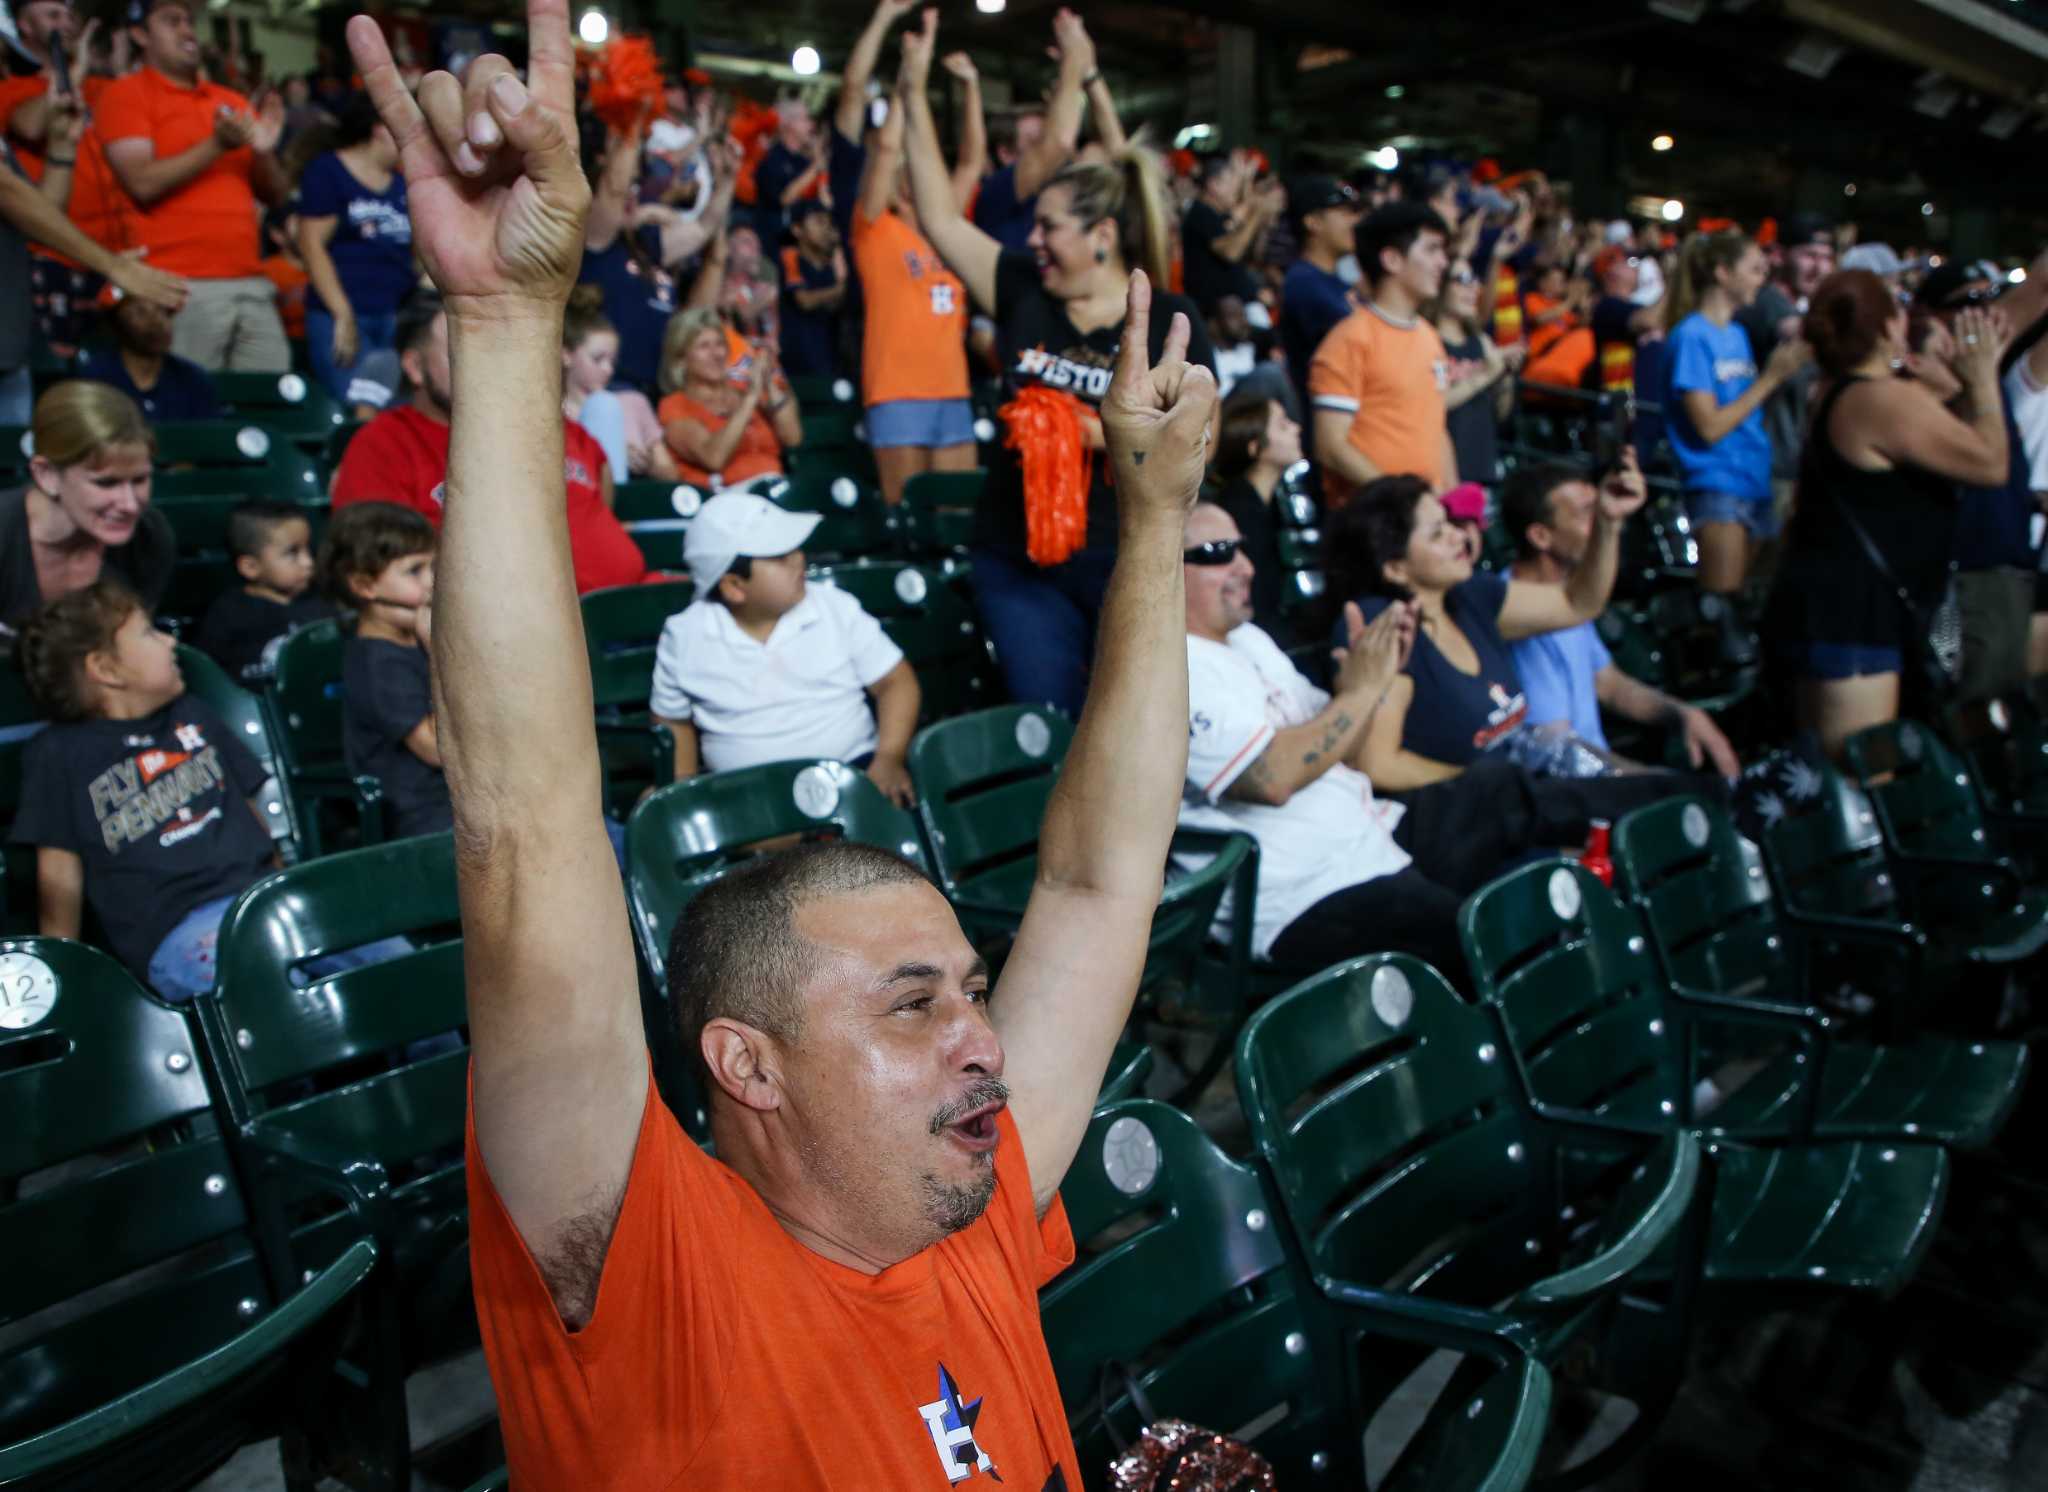 Astros fans party at Minute Maid Park for Game 1 of the ALCS